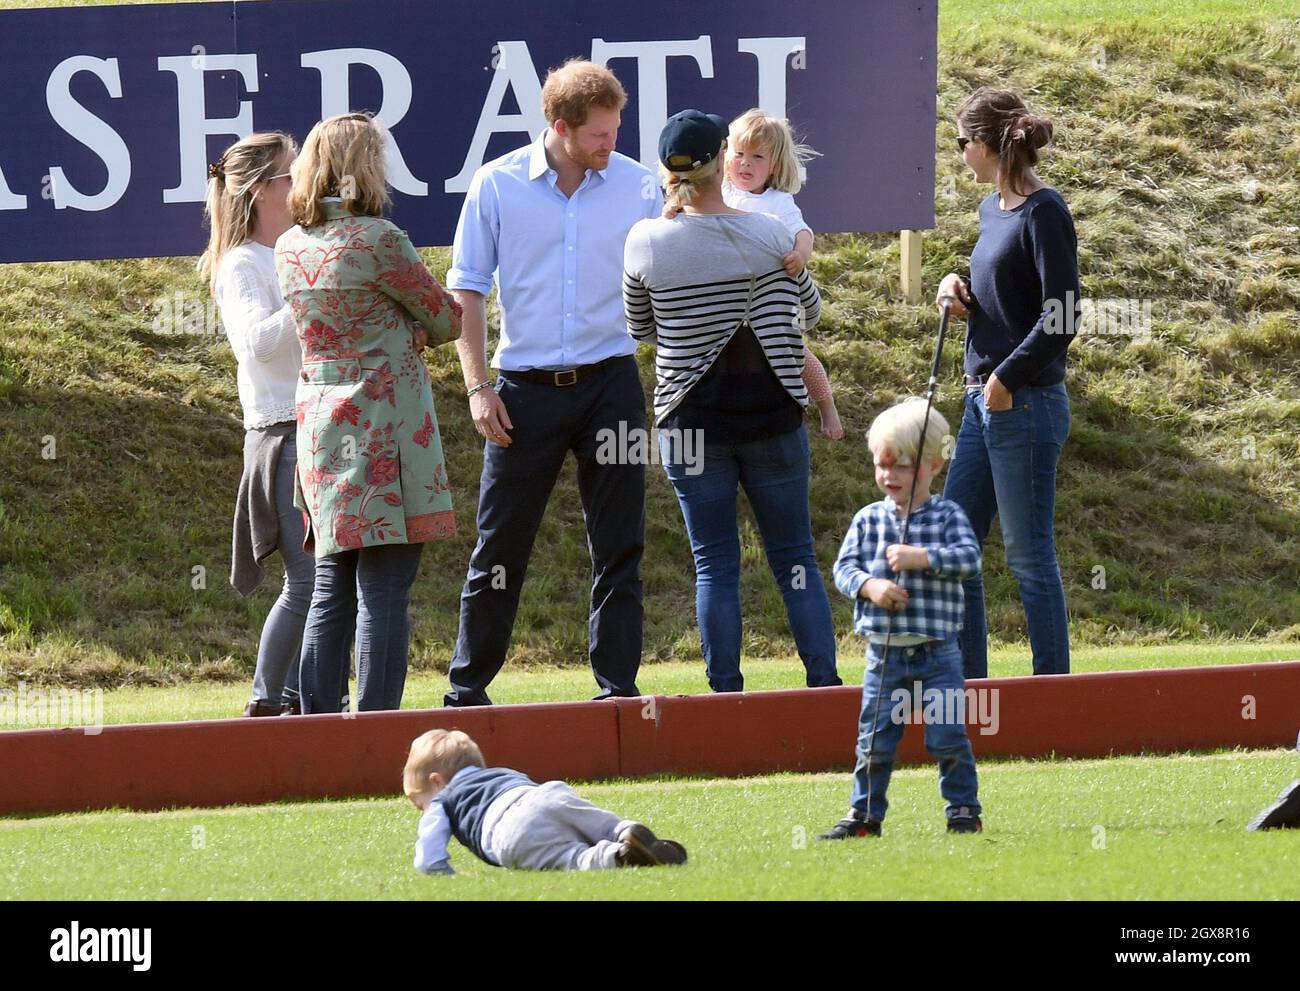 Prince Harry chats with Zara Tindall and Mia Tindall during the Maserati Charity Polo match at the Gloucestershire Festival of Polo at the Beaufort Polo Club on June 18, 2016. Stock Photo